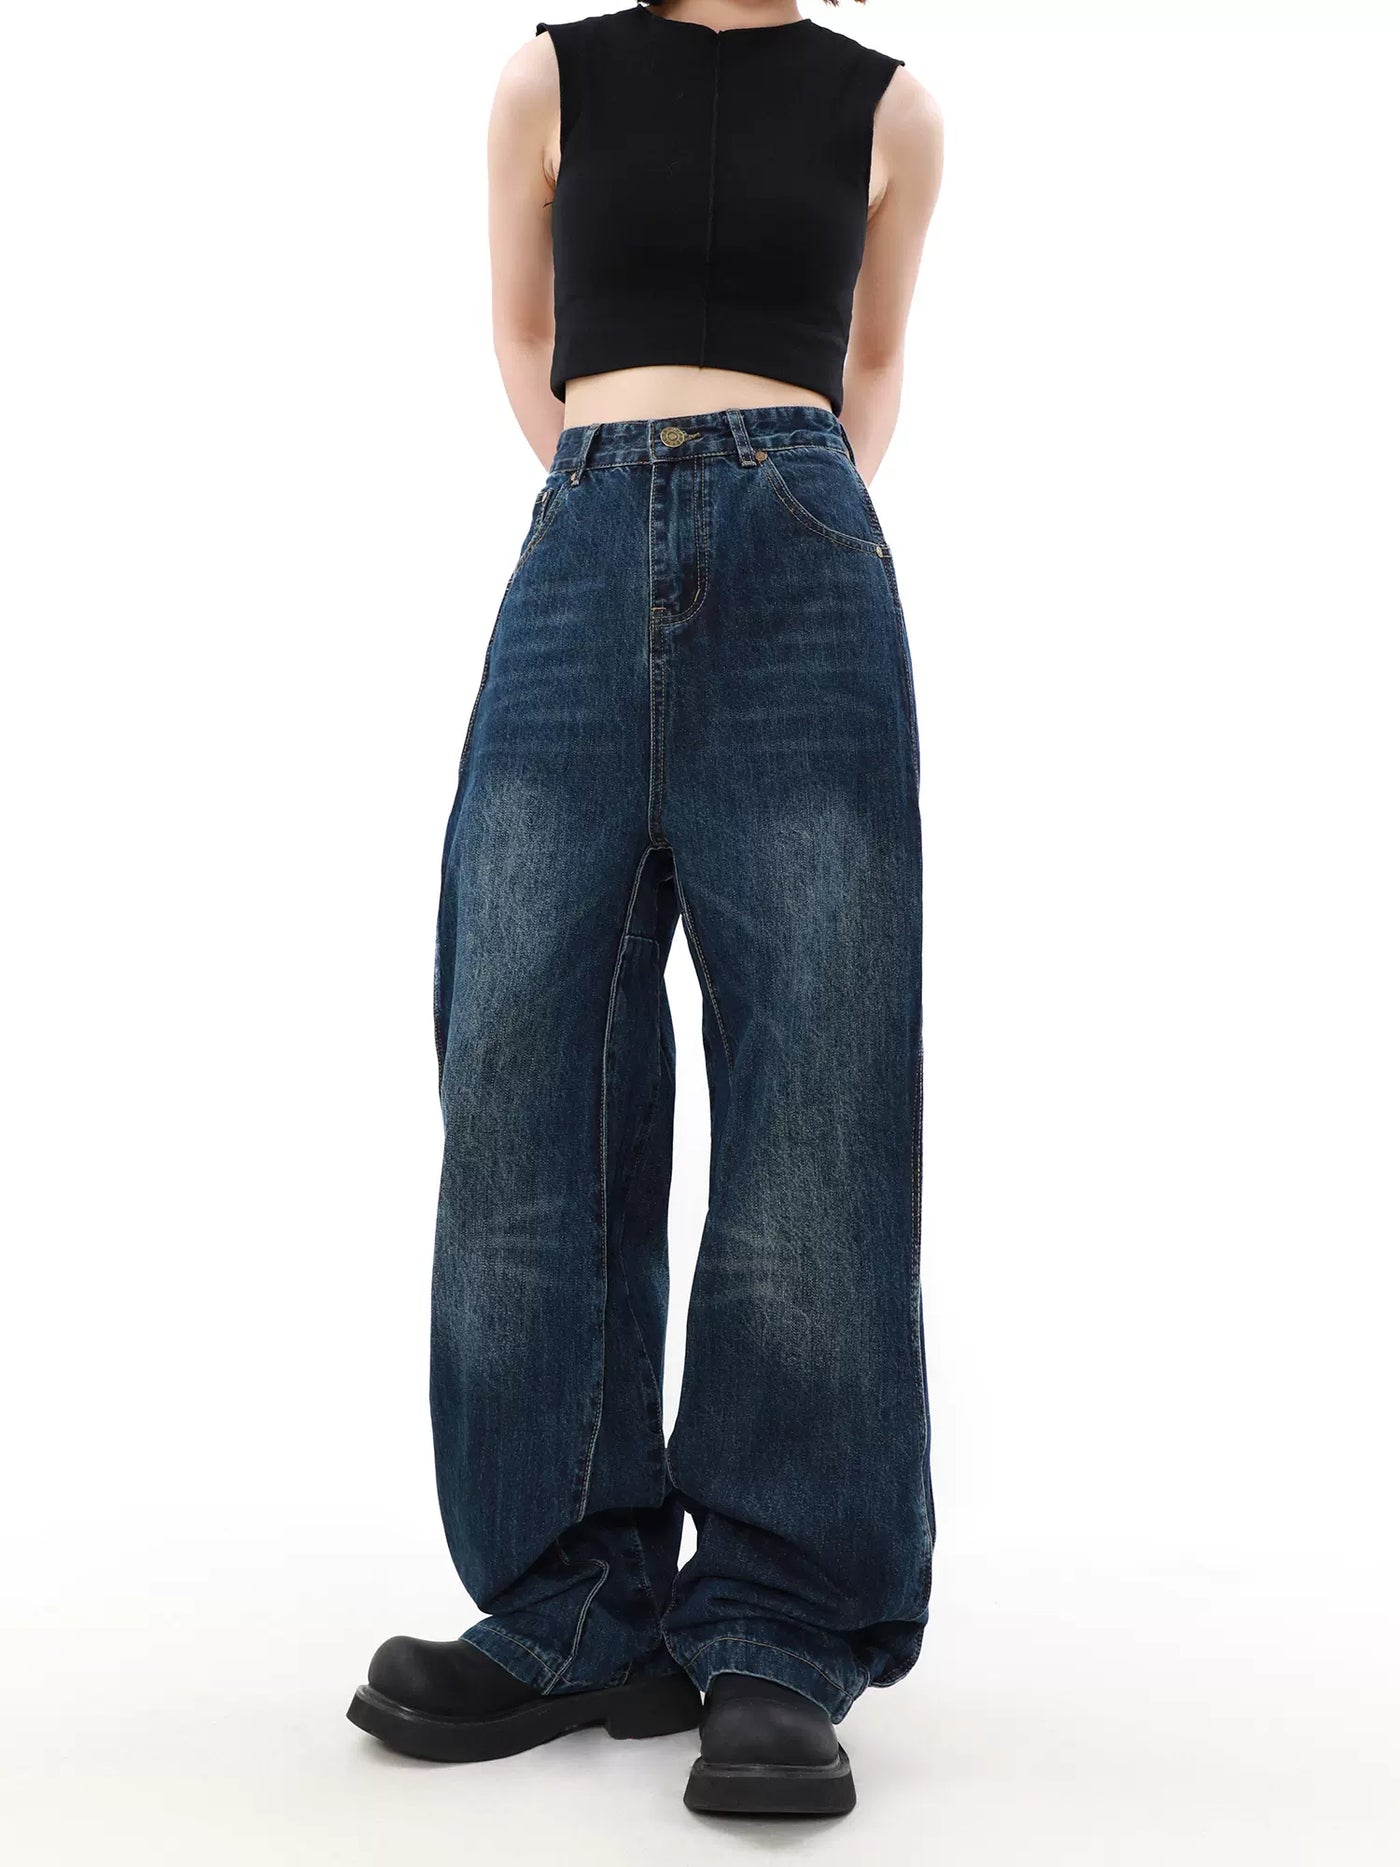 Subtle Fade Versatile Jeans Korean Street Fashion Jeans By Mr Nearly Shop Online at OH Vault